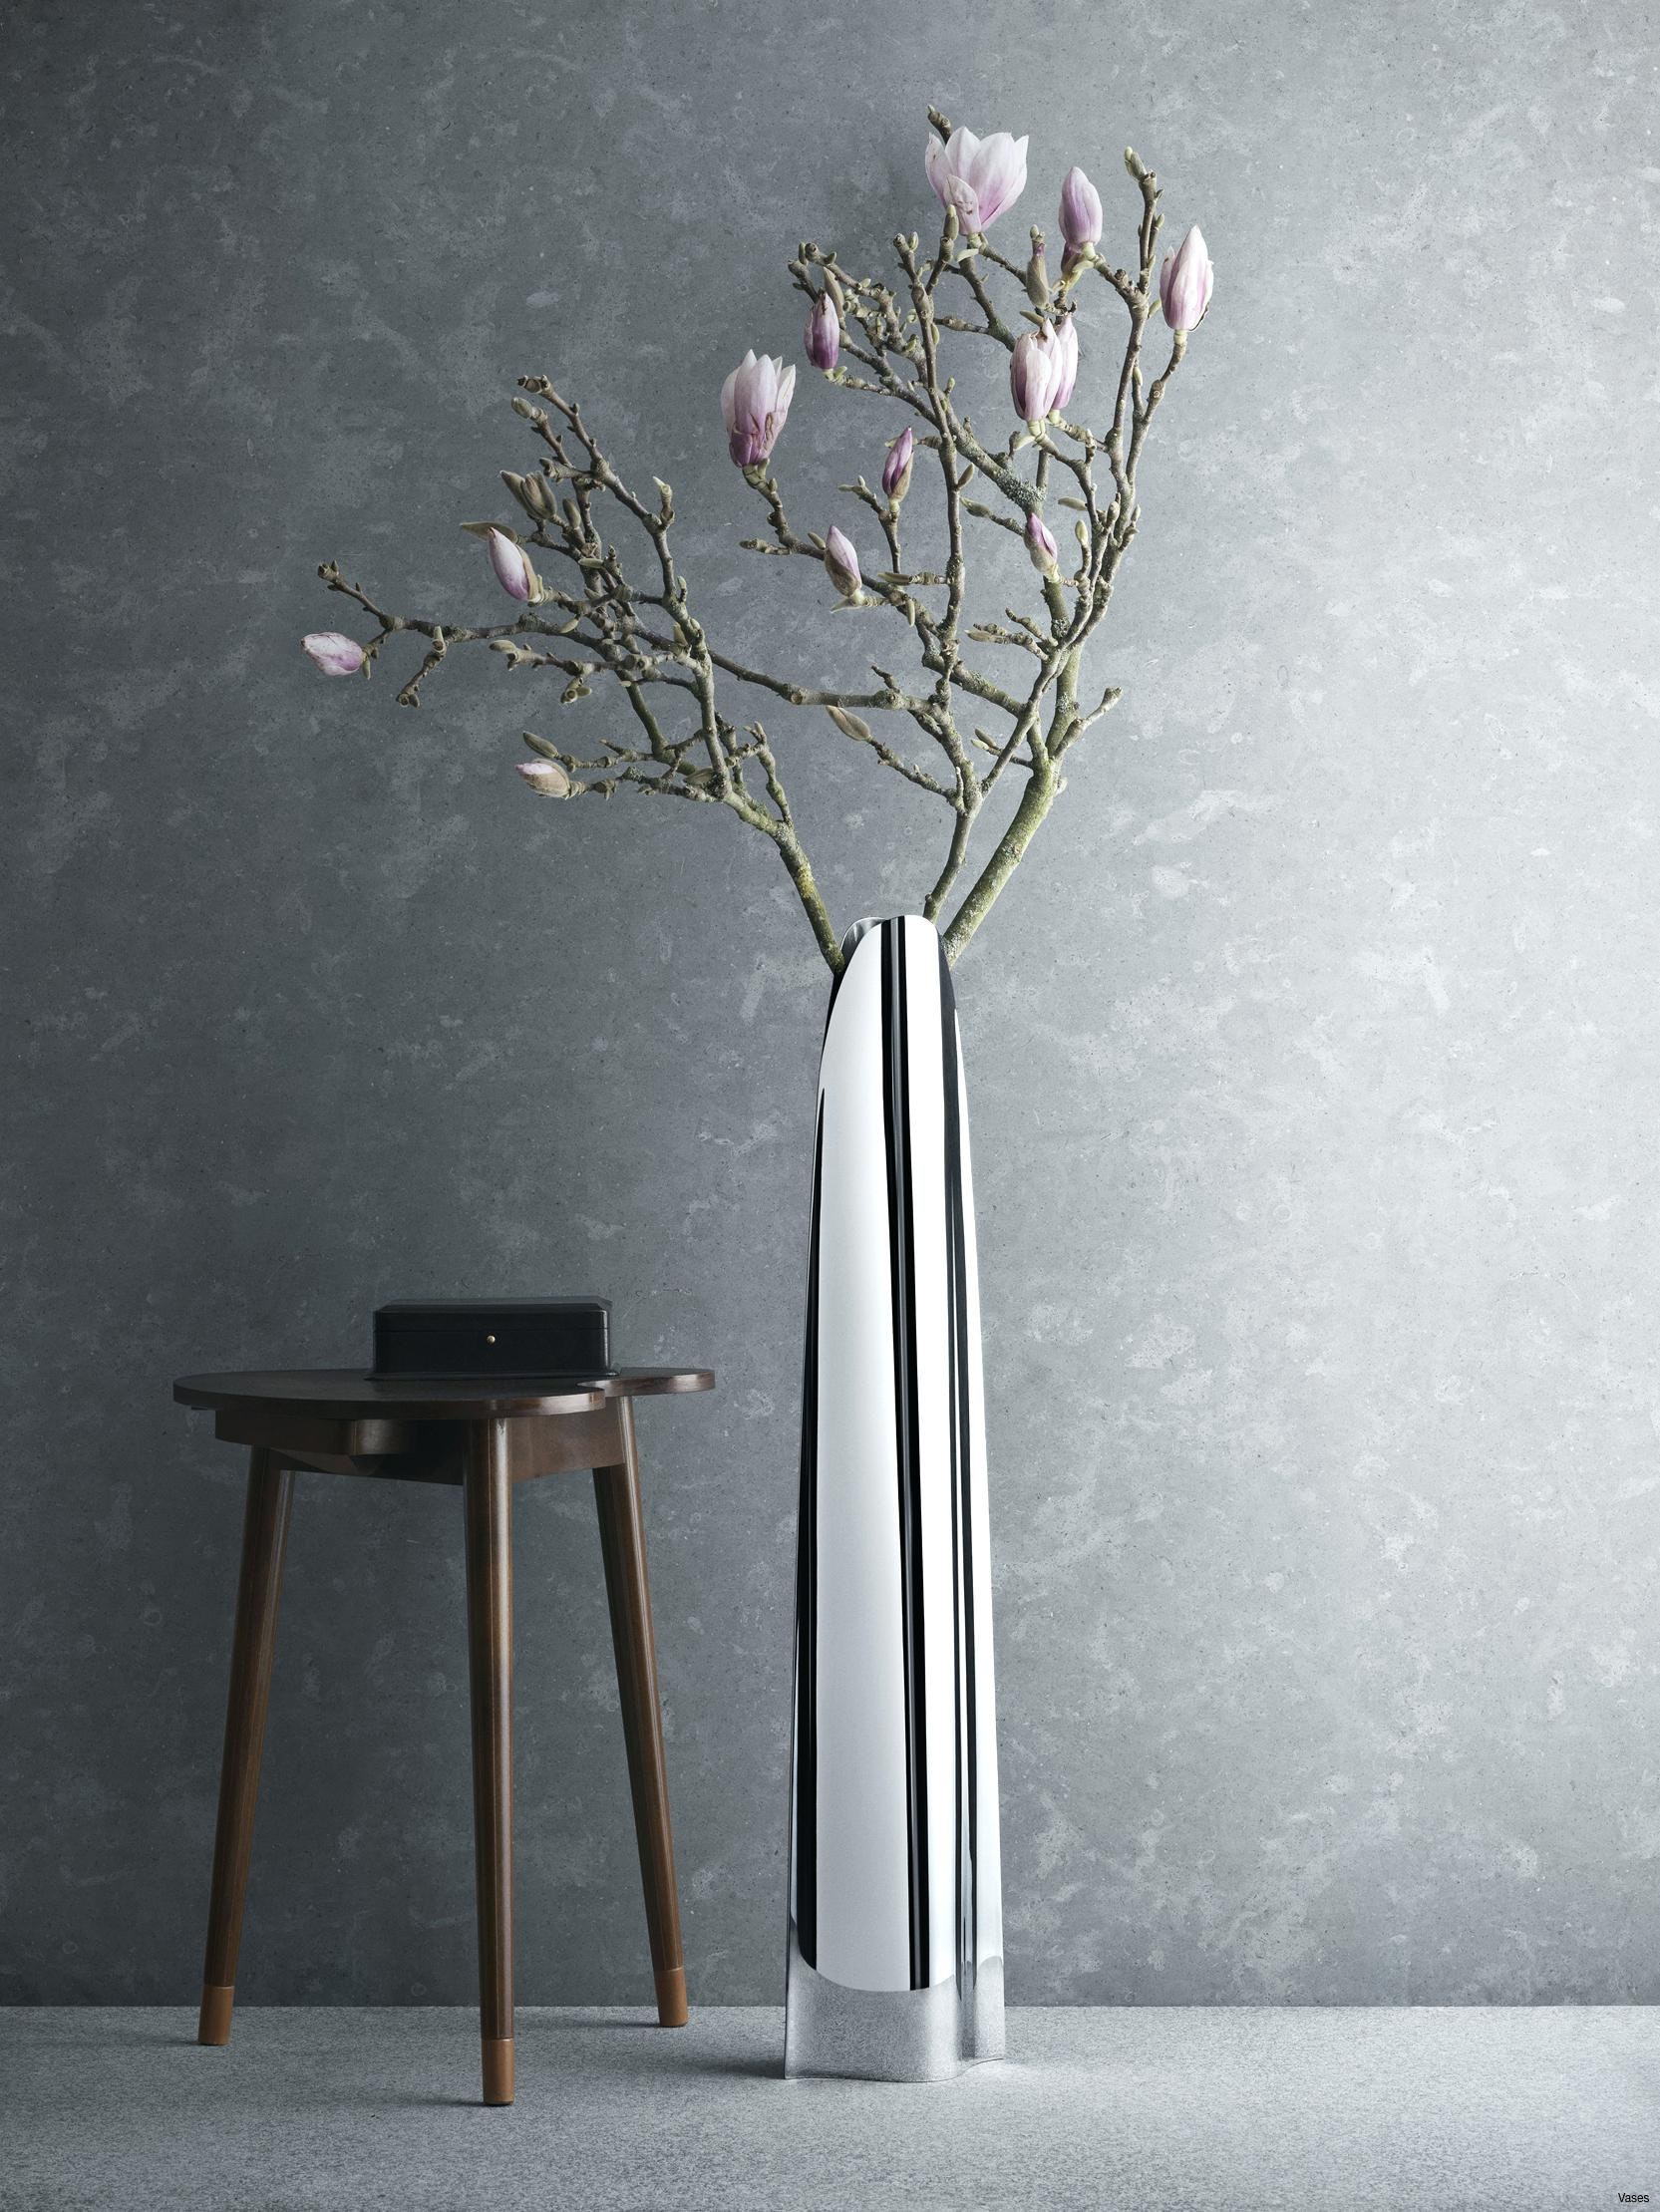 27 Fantastic Tall Wicker Vase 2024 free download tall wicker vase of decorating ideas for tall vases awesome h vases giant floor vase i with decorating ideas for tall vases lovely interesting black tall floor vase for exciting living room 